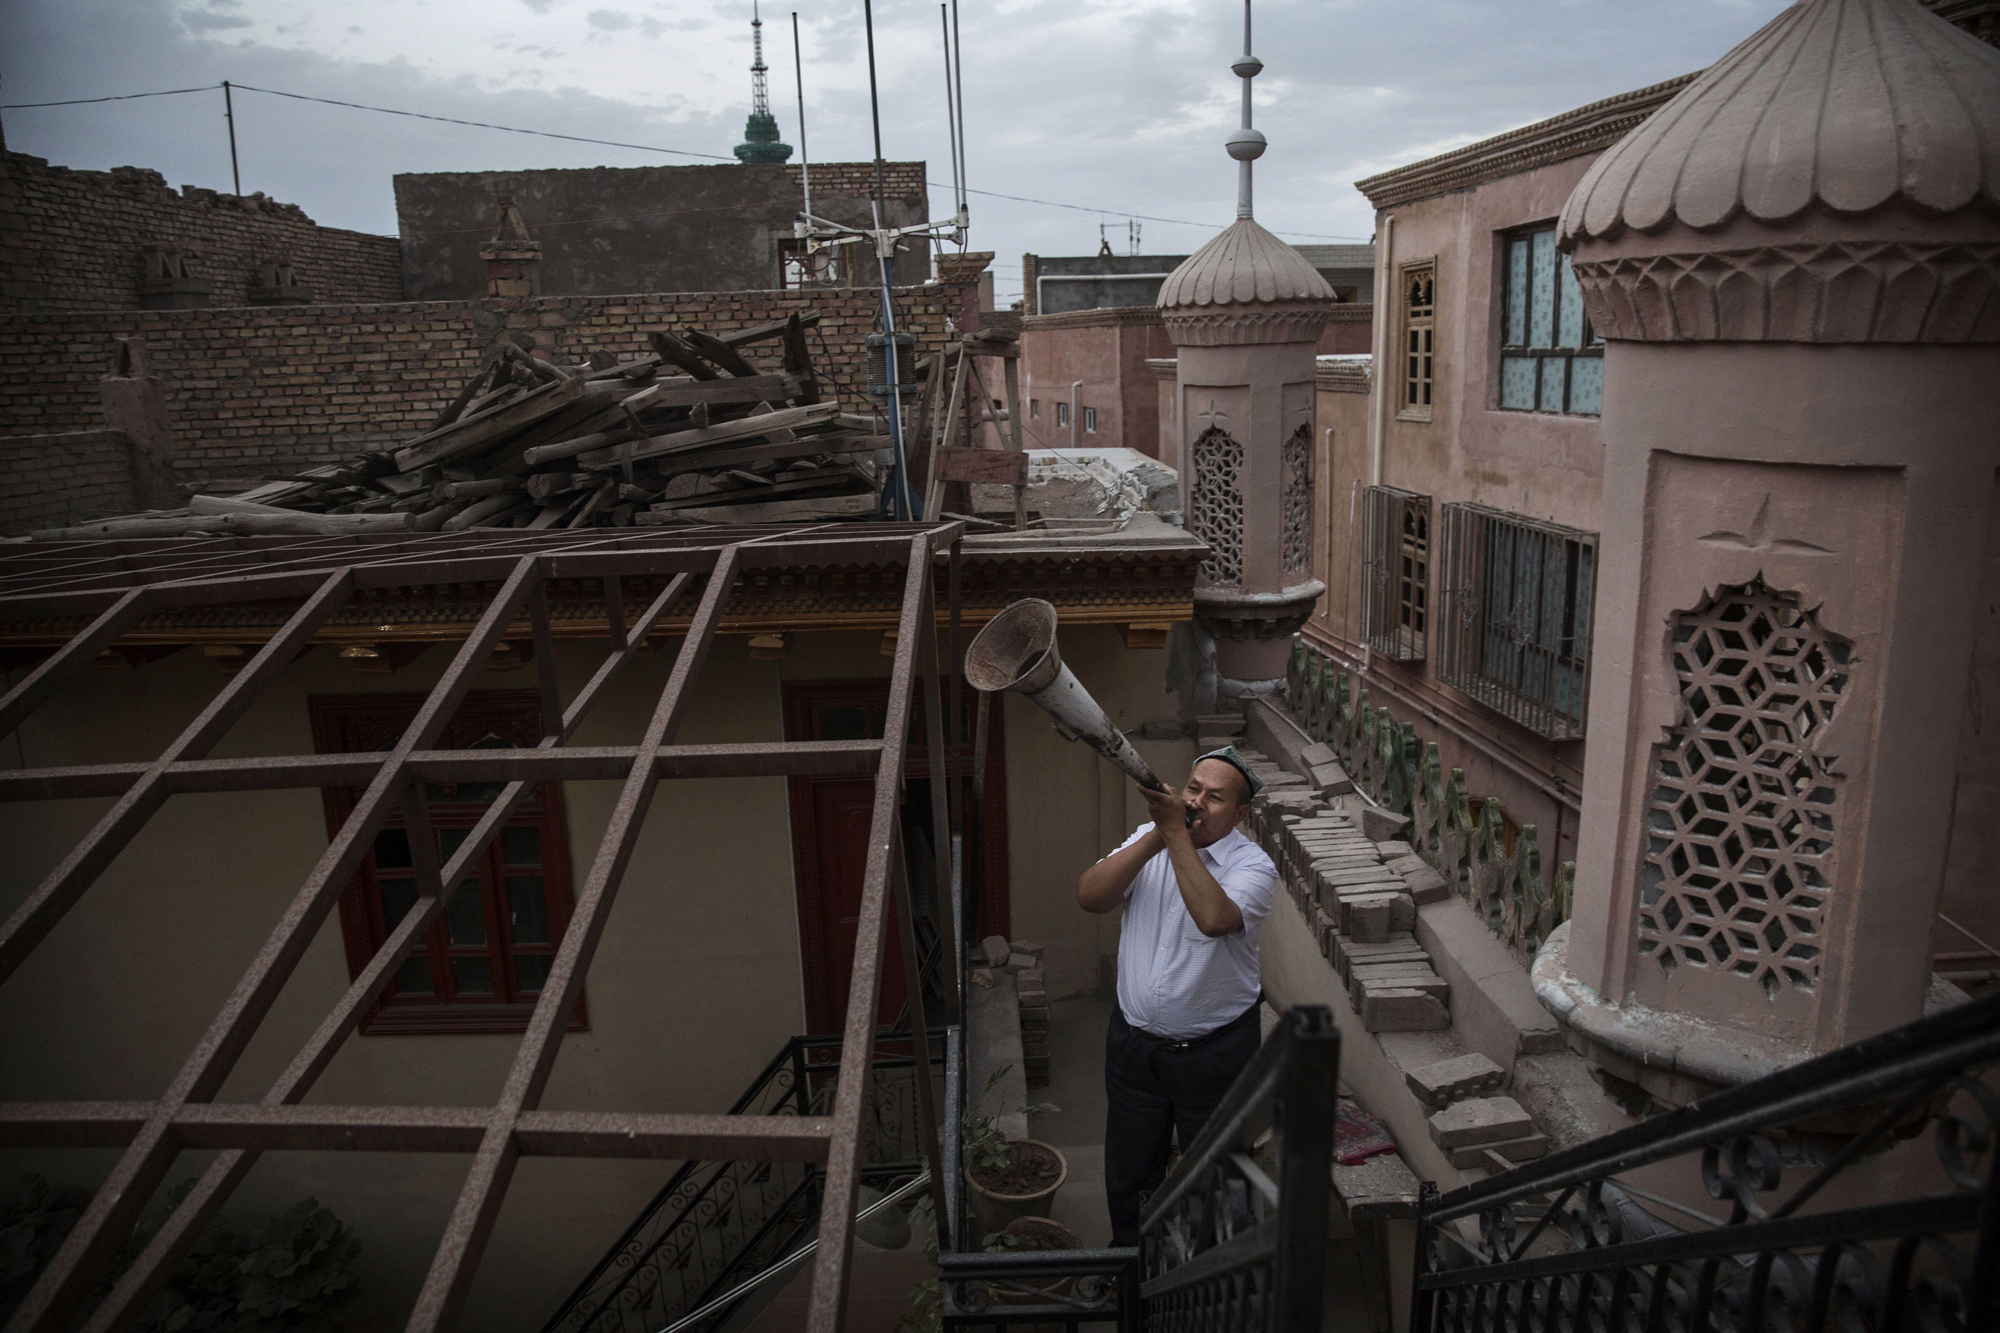 A Uyghur Muslim muezzin uses a bullhorn to call the evening prayers on July 30, 2014 in Kashgar.